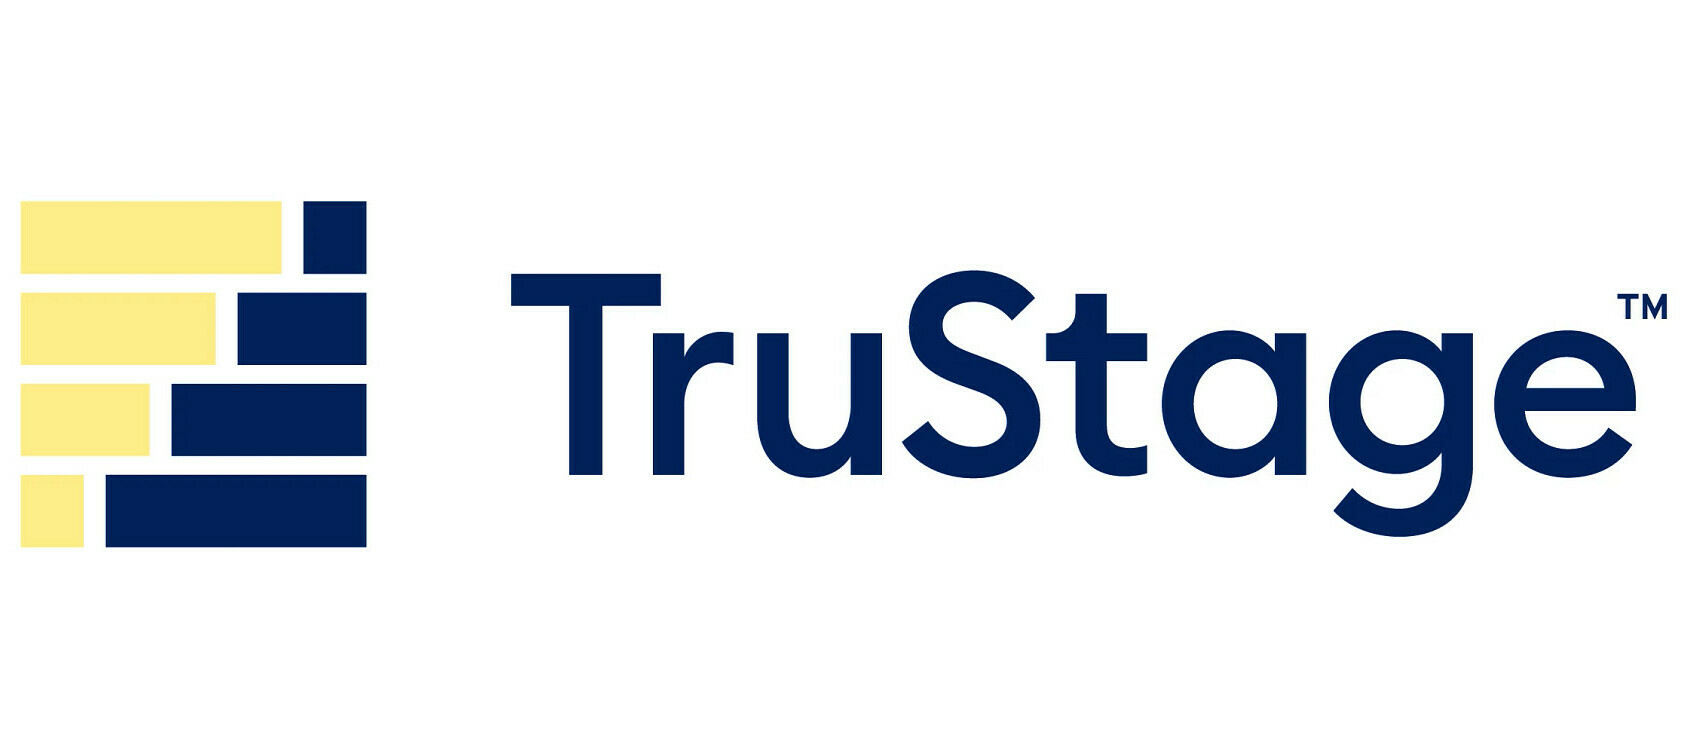 Compliance Systems is now TruStage Compliance Solutions!